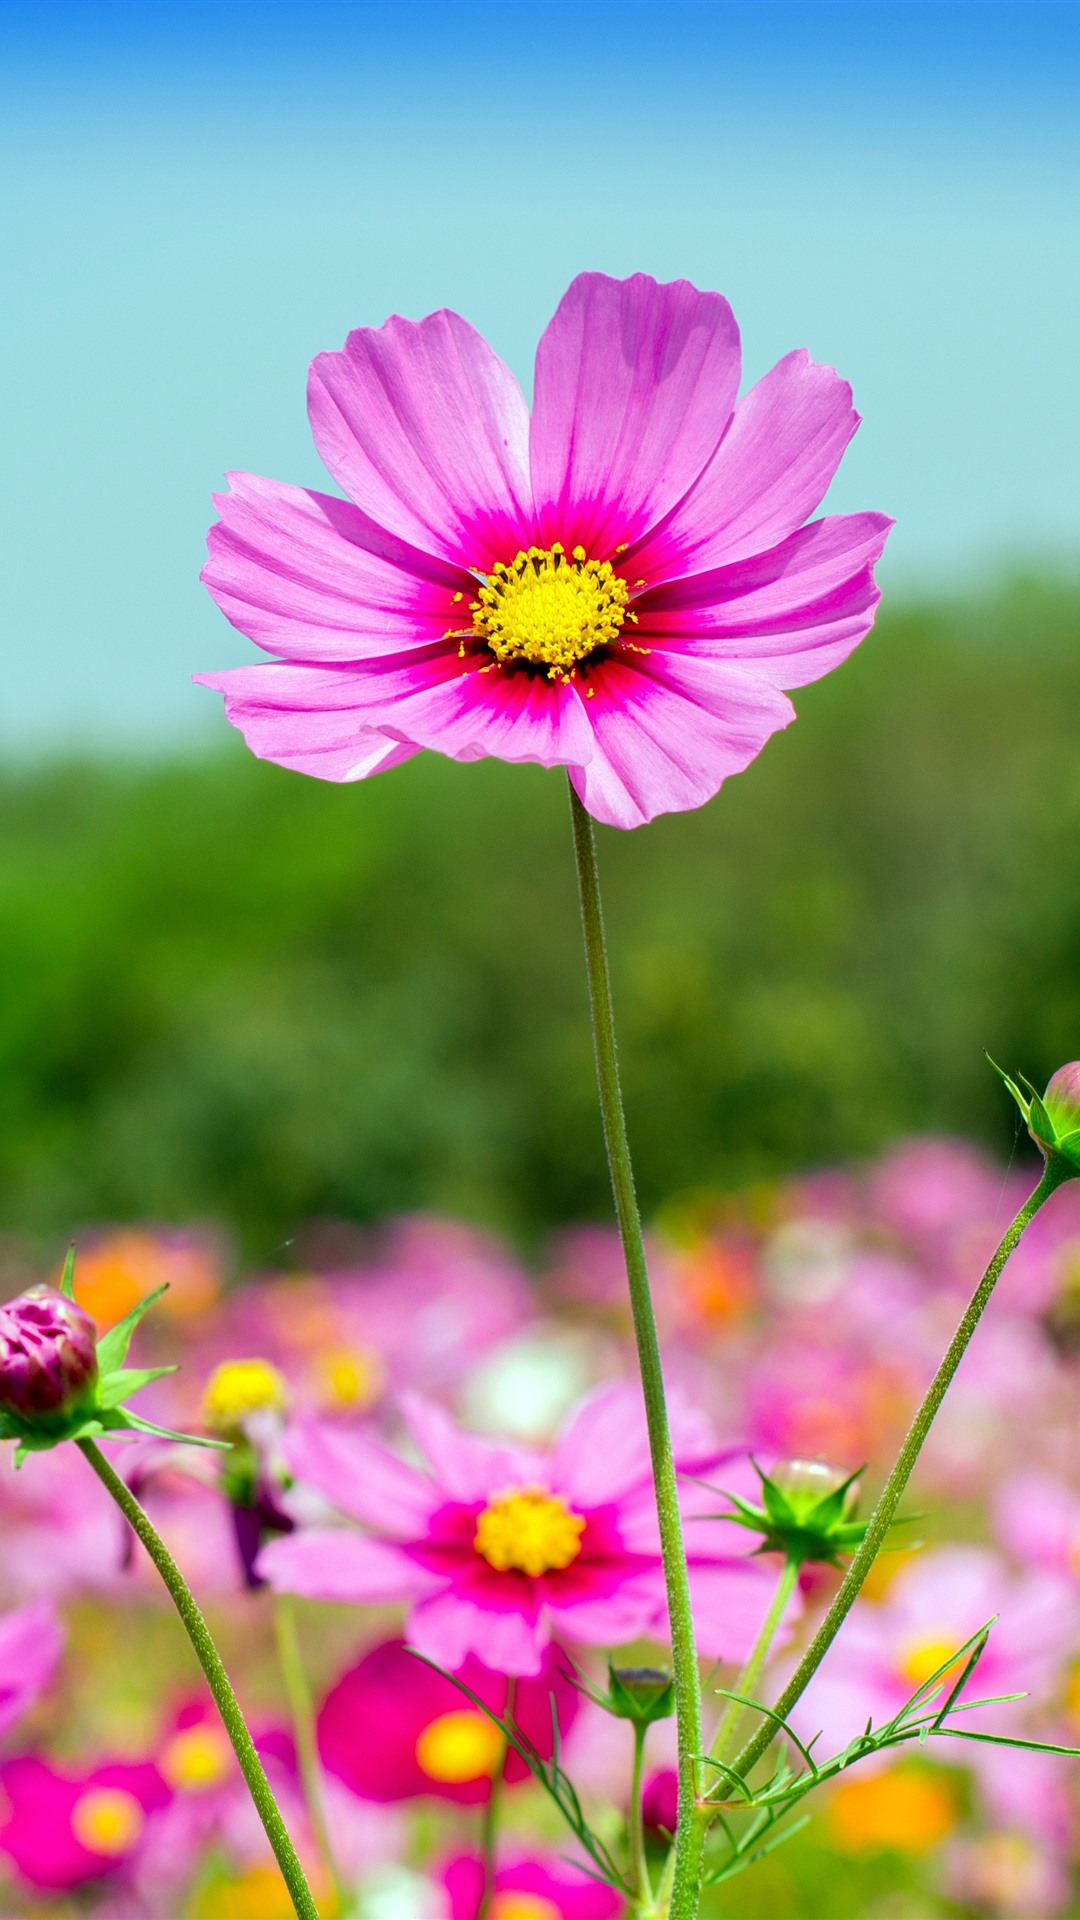 Wallpaper Pink cosmos flowers, summer 5120x2880 UHD 5K Picture, Image